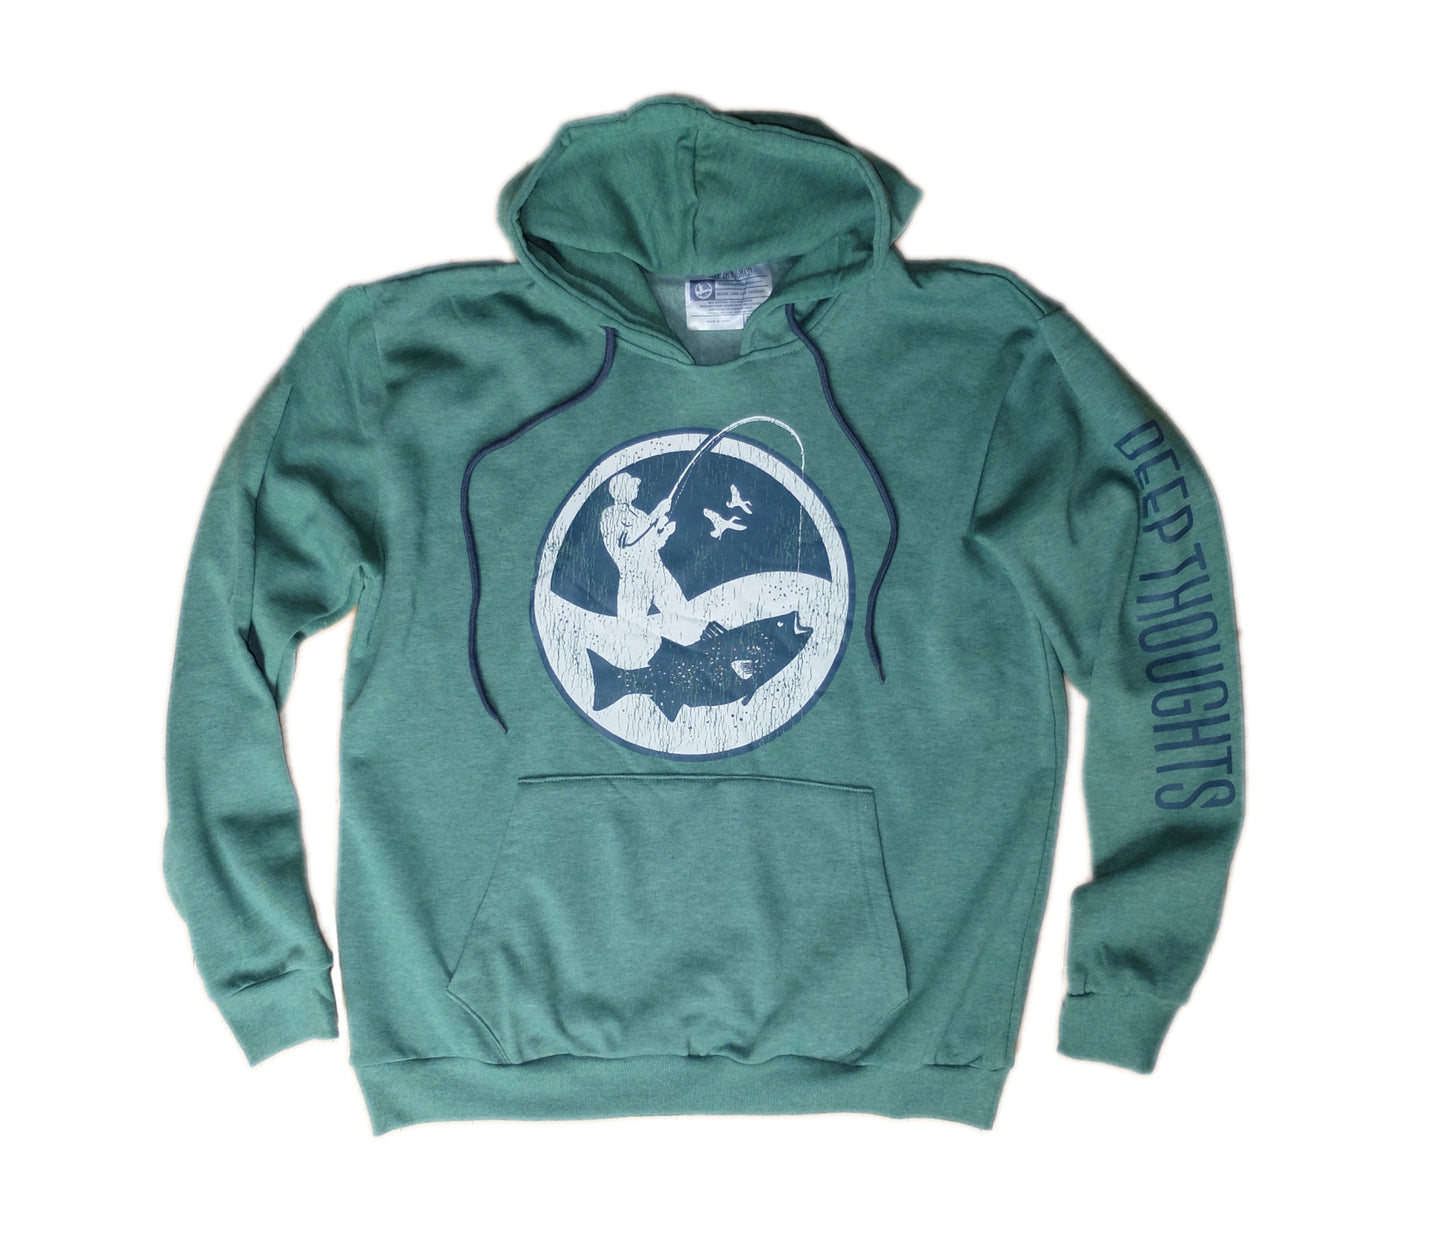 heather green hoodie with large round navy blue and white surf fisherman logo